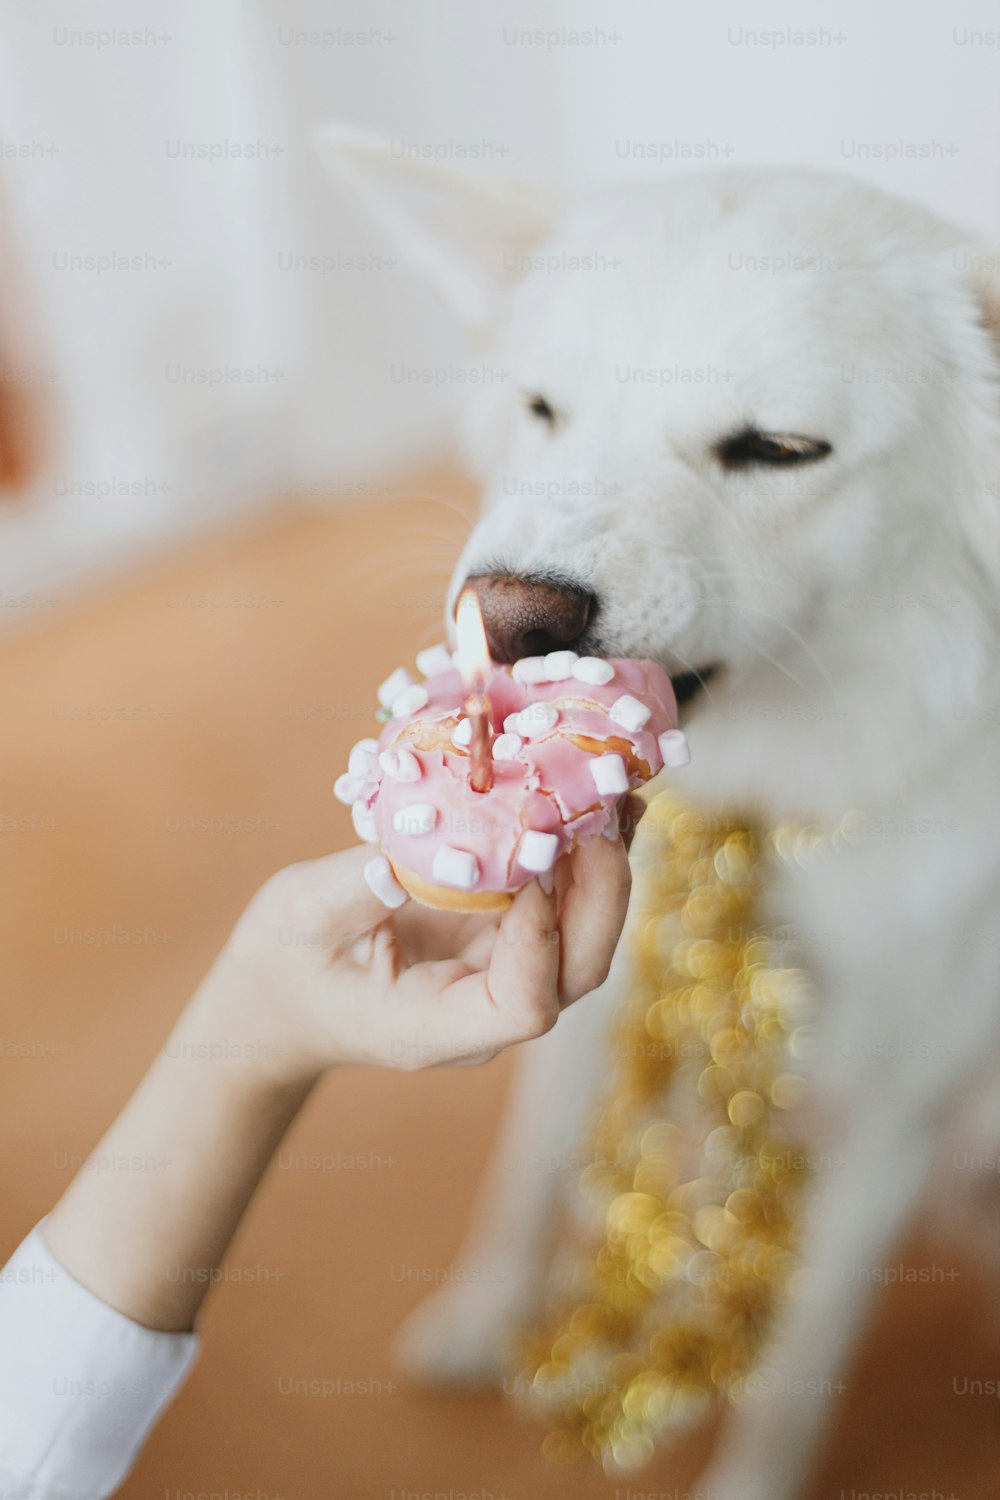 Cute dog biting birthday donut with candle on background of pink garland and decorations. Celebrating adorable white swiss shepherd dog first birthday. Dog birthday party